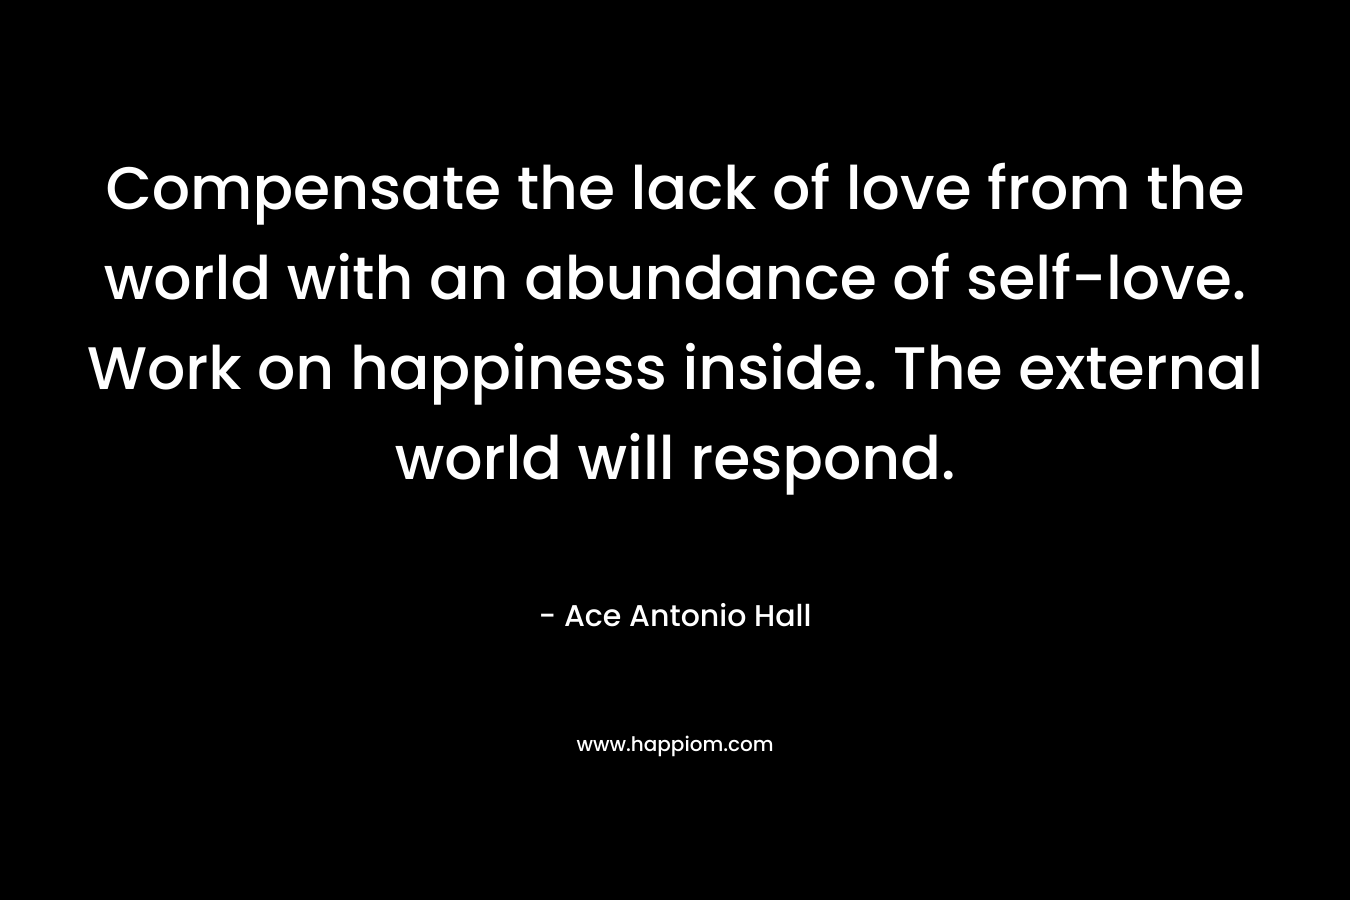 Compensate the lack of love from the world with an abundance of self-love. Work on happiness inside. The external world will respond. – Ace Antonio Hall